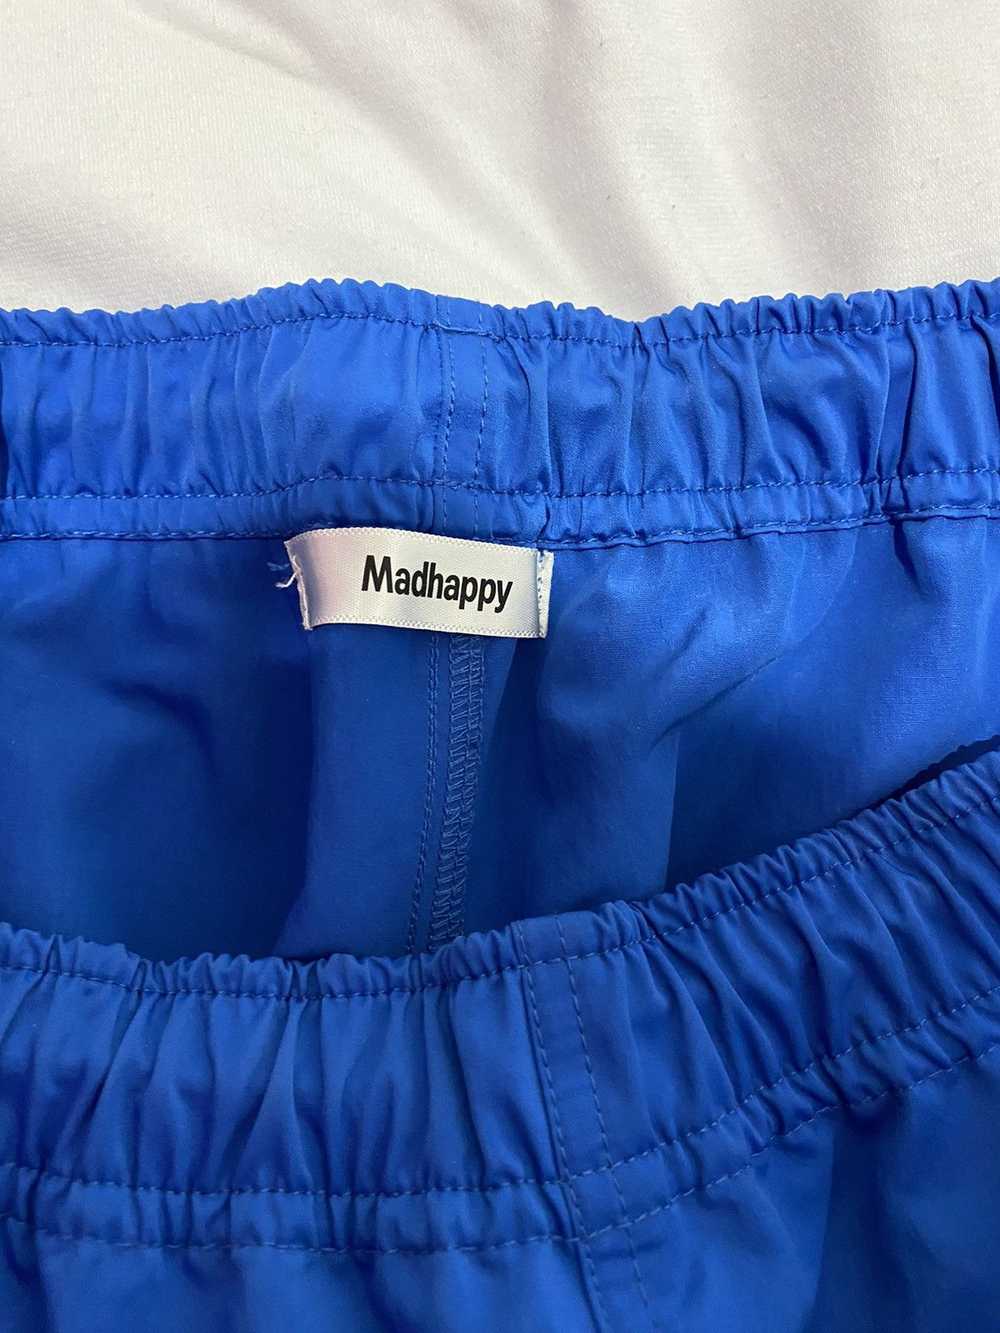 Madhappy Madhappy L.O.R.A. WARM UP PANT - image 3